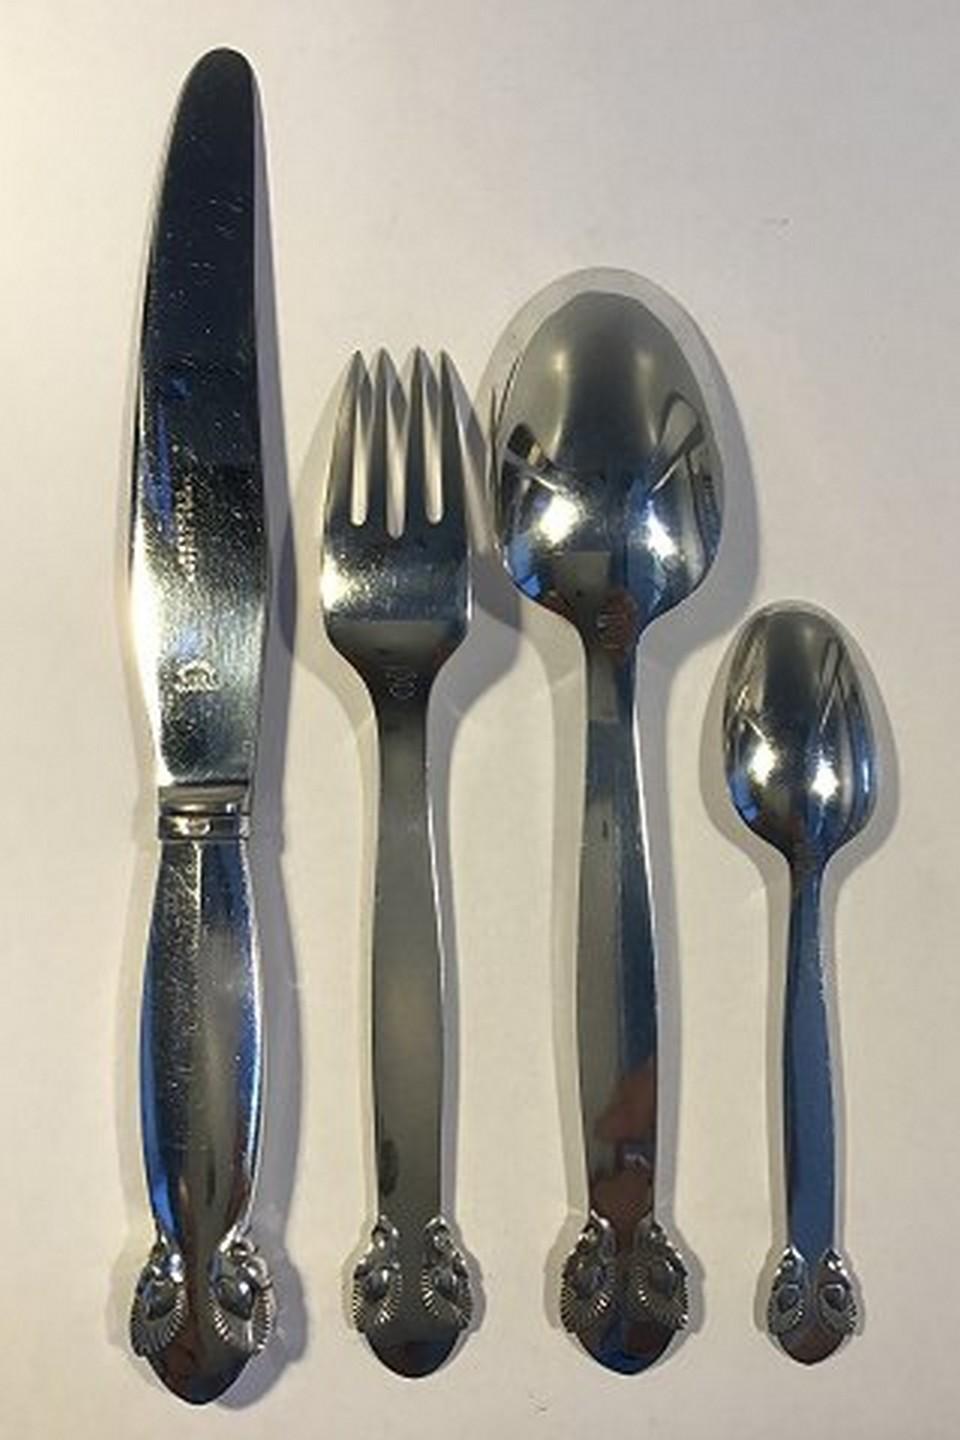 Georg Jensen sterling silver bittersweet flatware set for 8 persons, 32 pieces

The set consists of

8 x dinnerknifes with short handle, 24.7 cm / 9 23/32 in.
8 x dinner forks, 18.7 cm / 6 31/32 in.
8 x dinner spoons, 20 cm / 7 7/8 in.
8 x